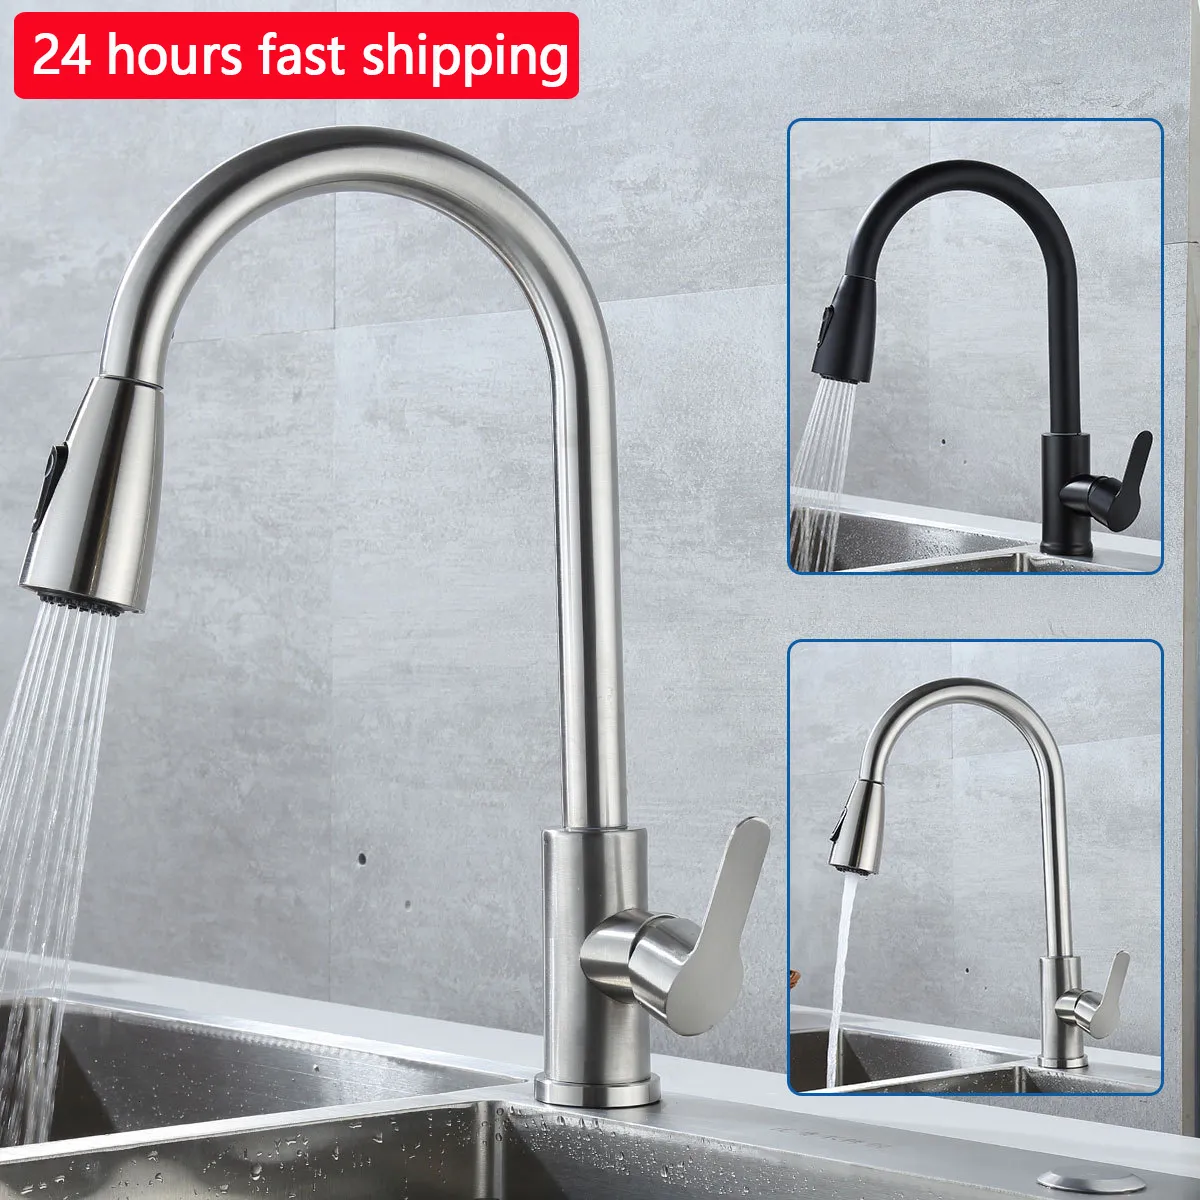 Kitchen Faucets Faucet Stainless Steel Cold Water Mixer Tap 2 Function Stream Sprayer Single Handle Pull Out Taps 230510